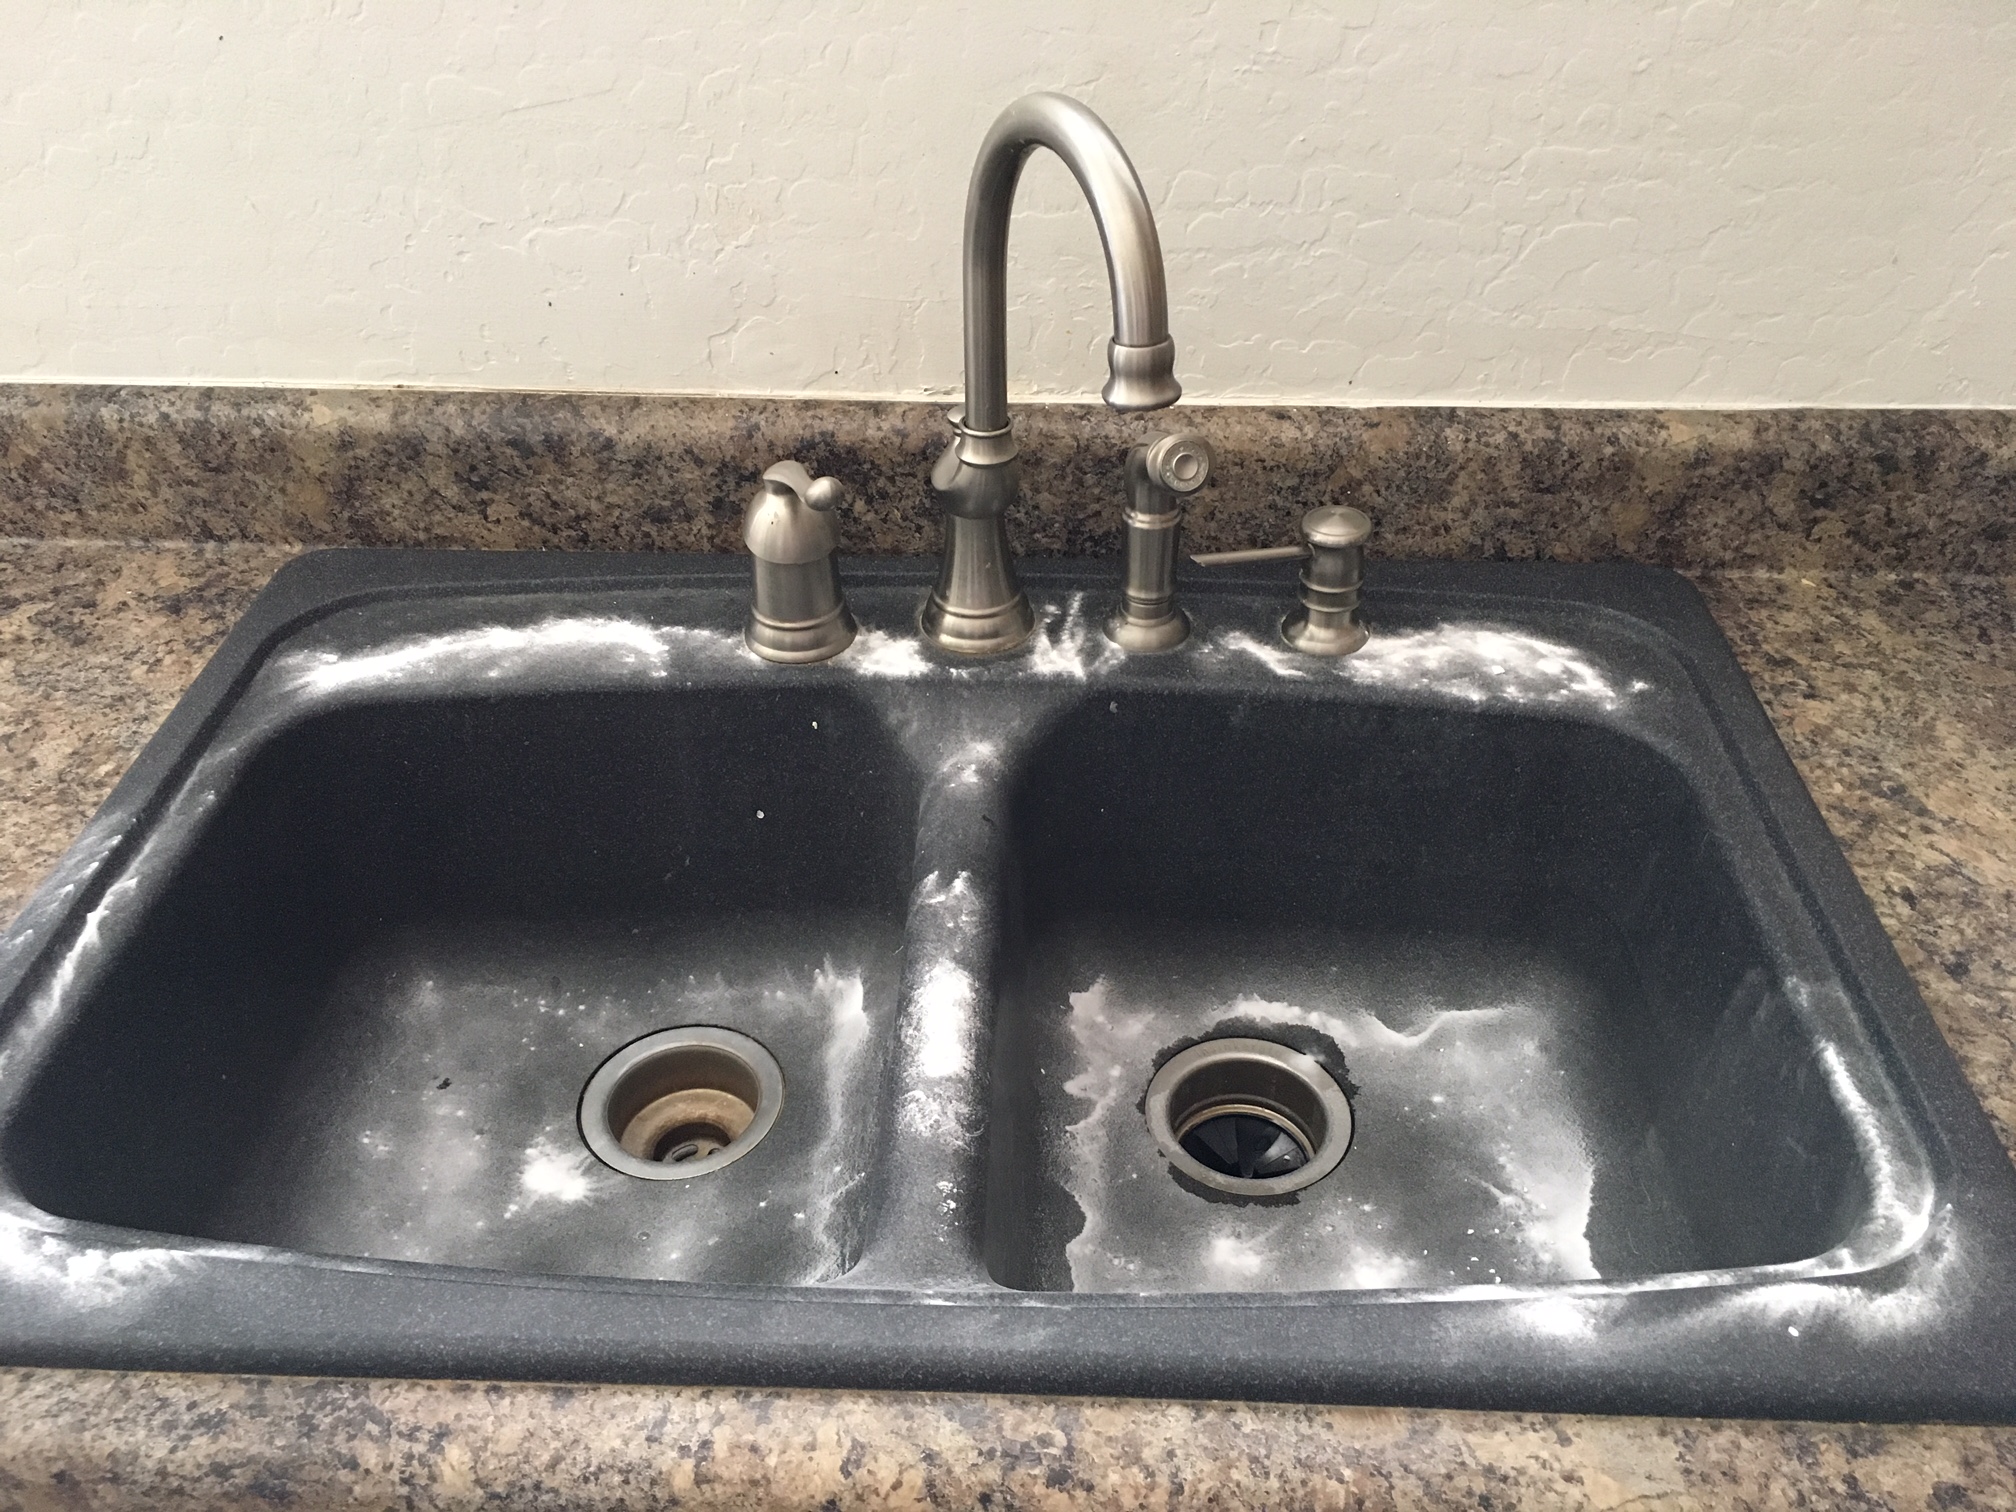 8 Simple Steps to Clean a Granite Sink - House Tipster